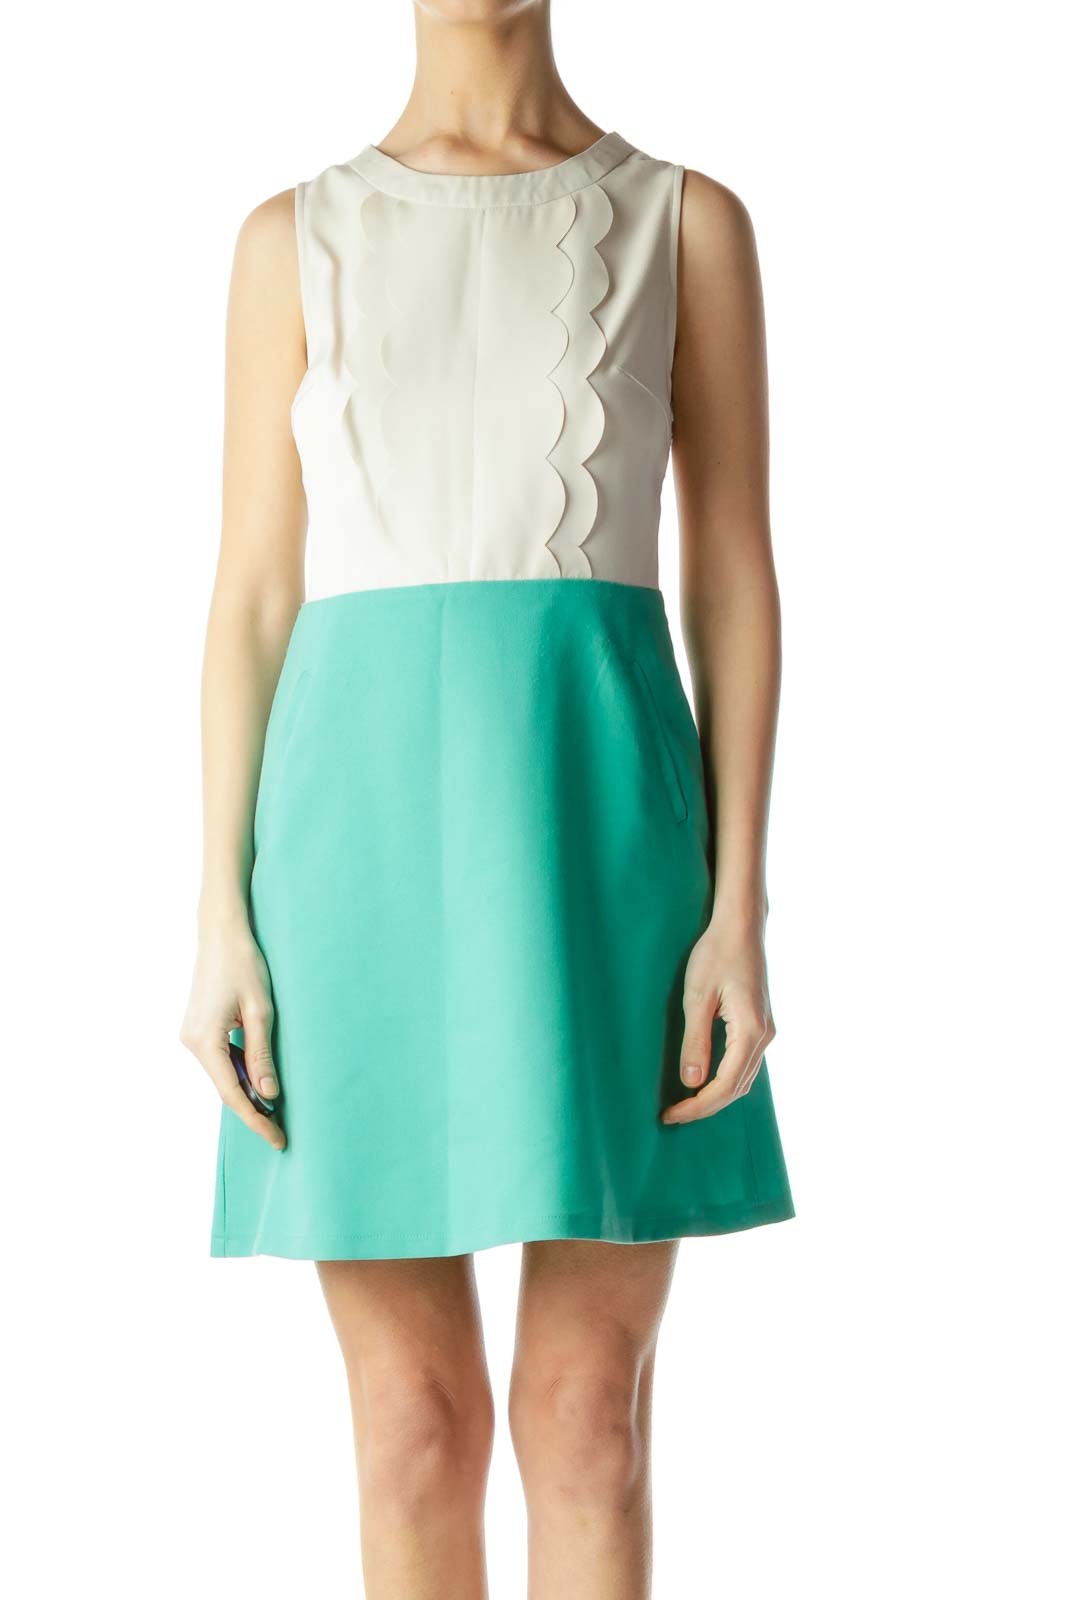 Beige and Mint Green Back Knit Dress Front